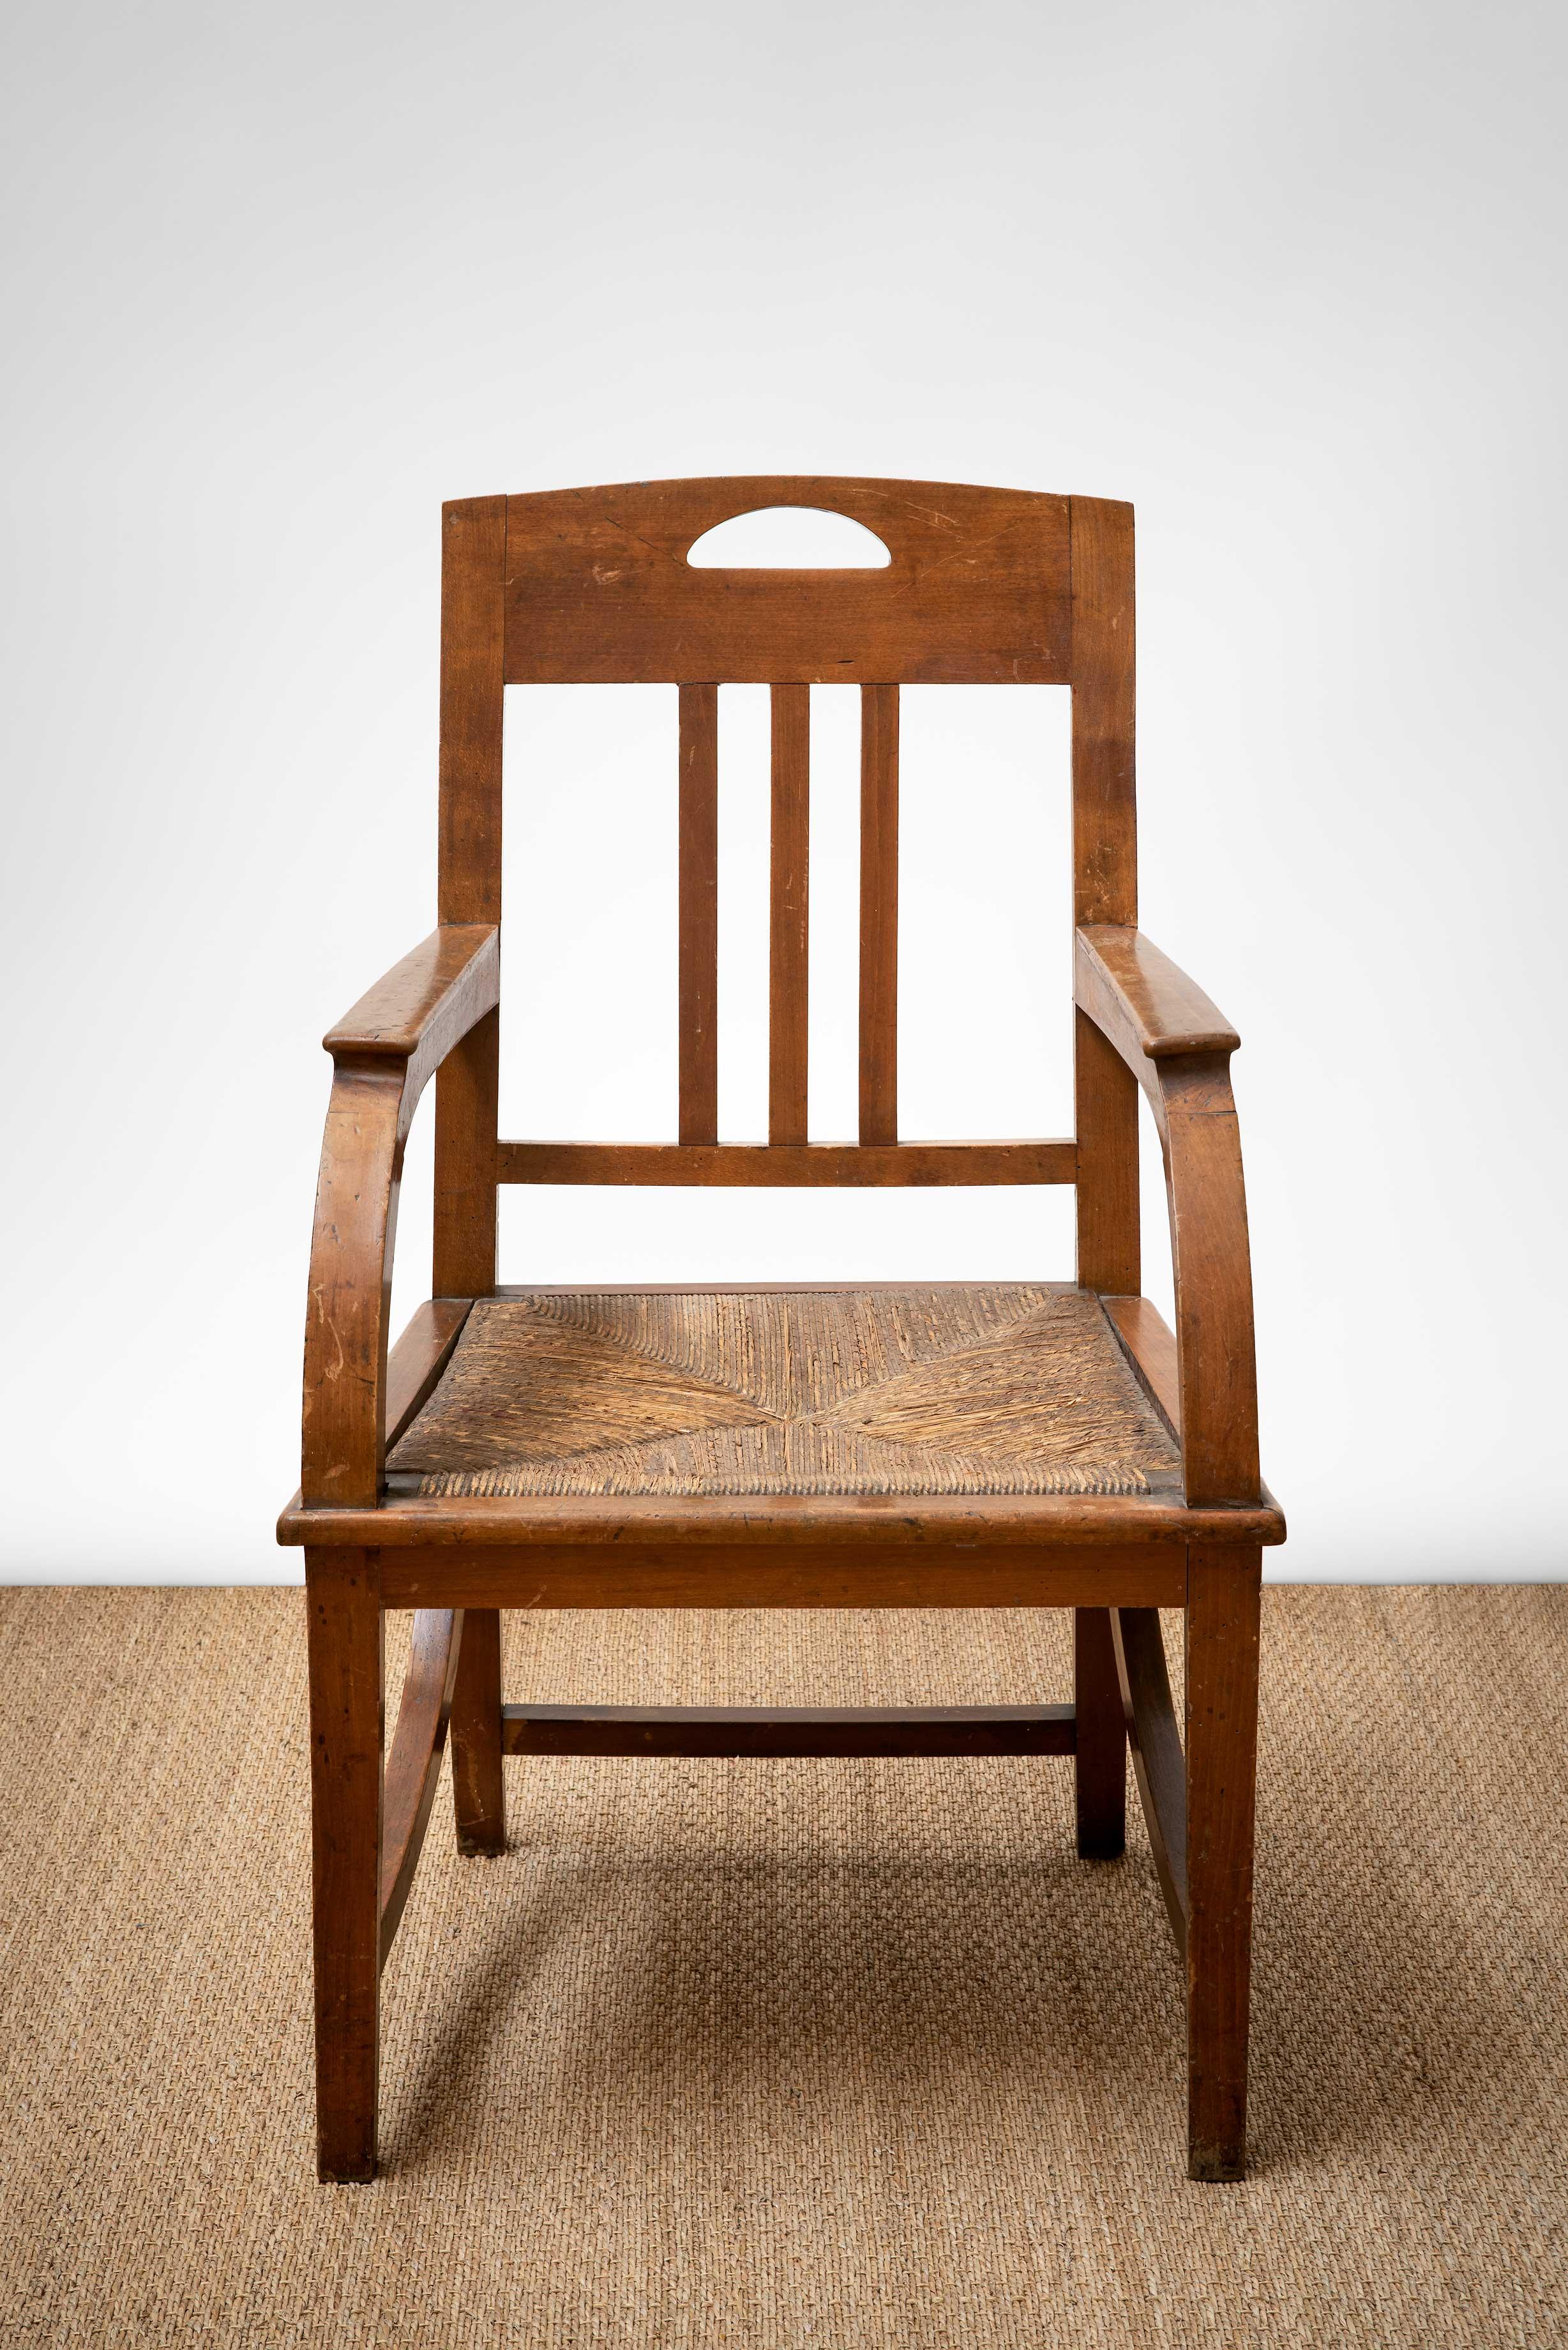 French Arts + Crafts walnut frame armchair with new rush seat, France, early 20th century.